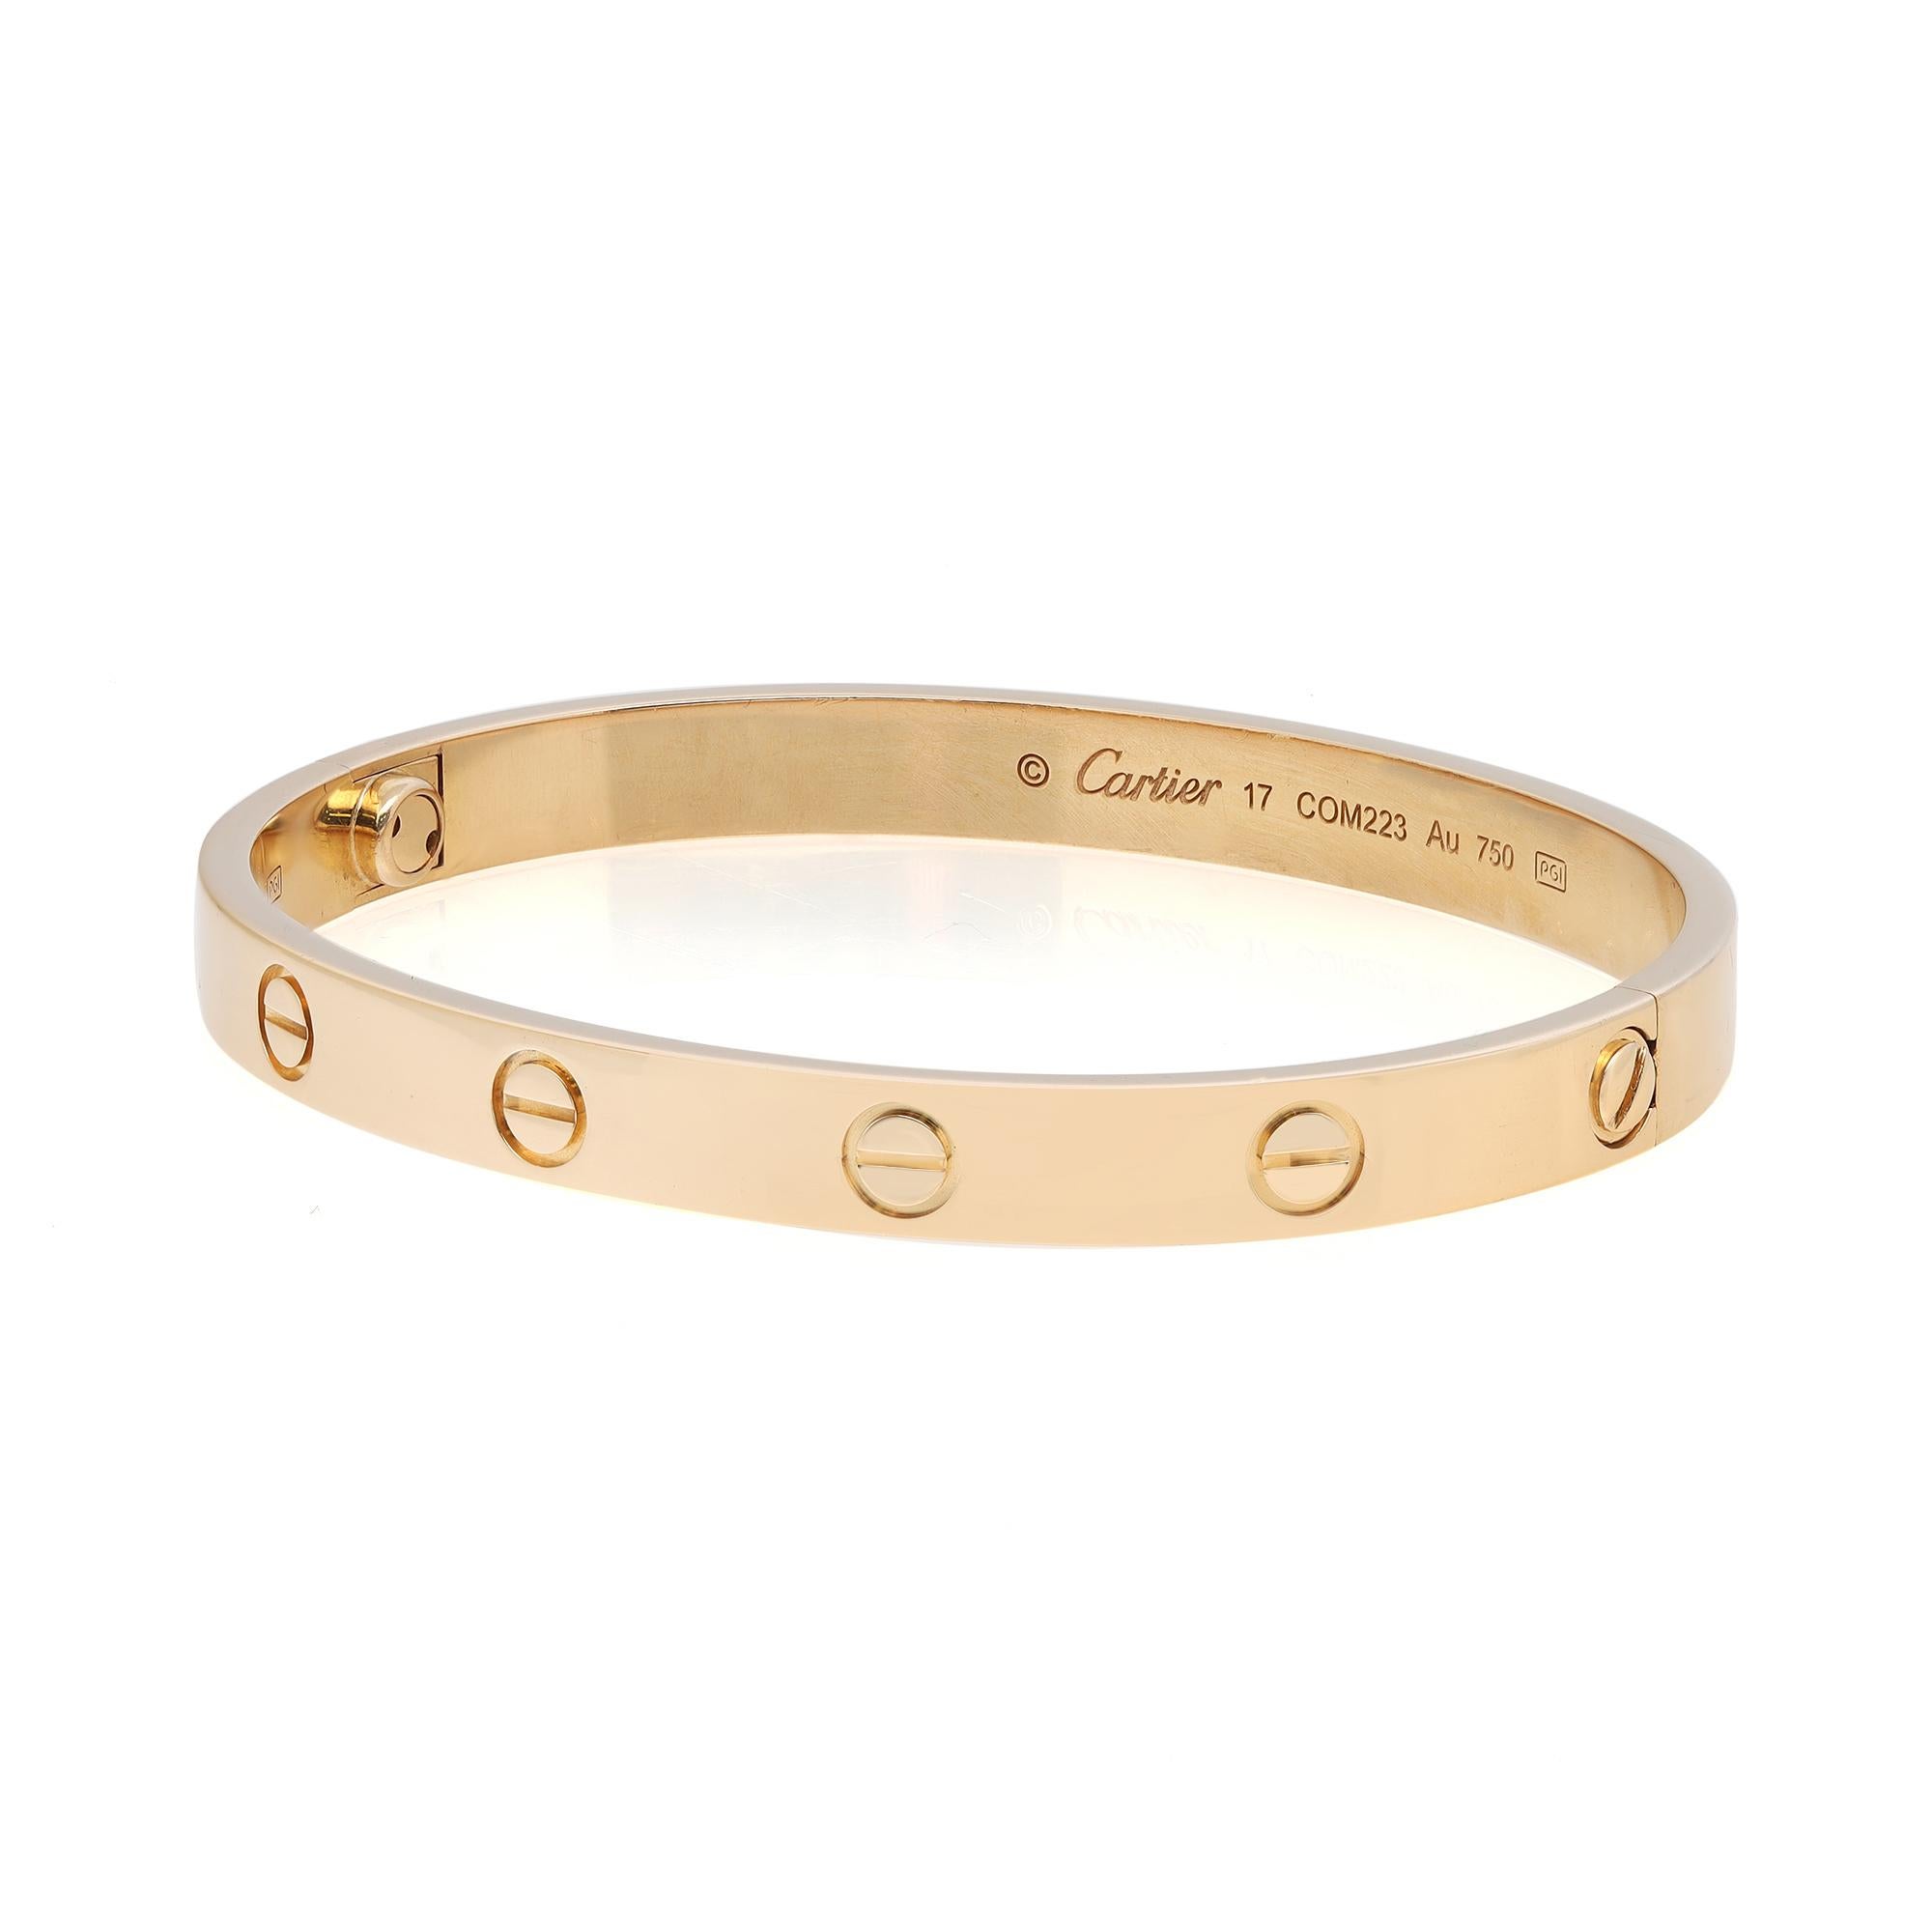 Cartier classic 18K yellow gold Love bangle bracelet size 17. Width: 6.1mm. New style screw system. Excellent pre owned condition. Come with a screwdriver and original box. original papers are not included. Chronostore appraisal included.
